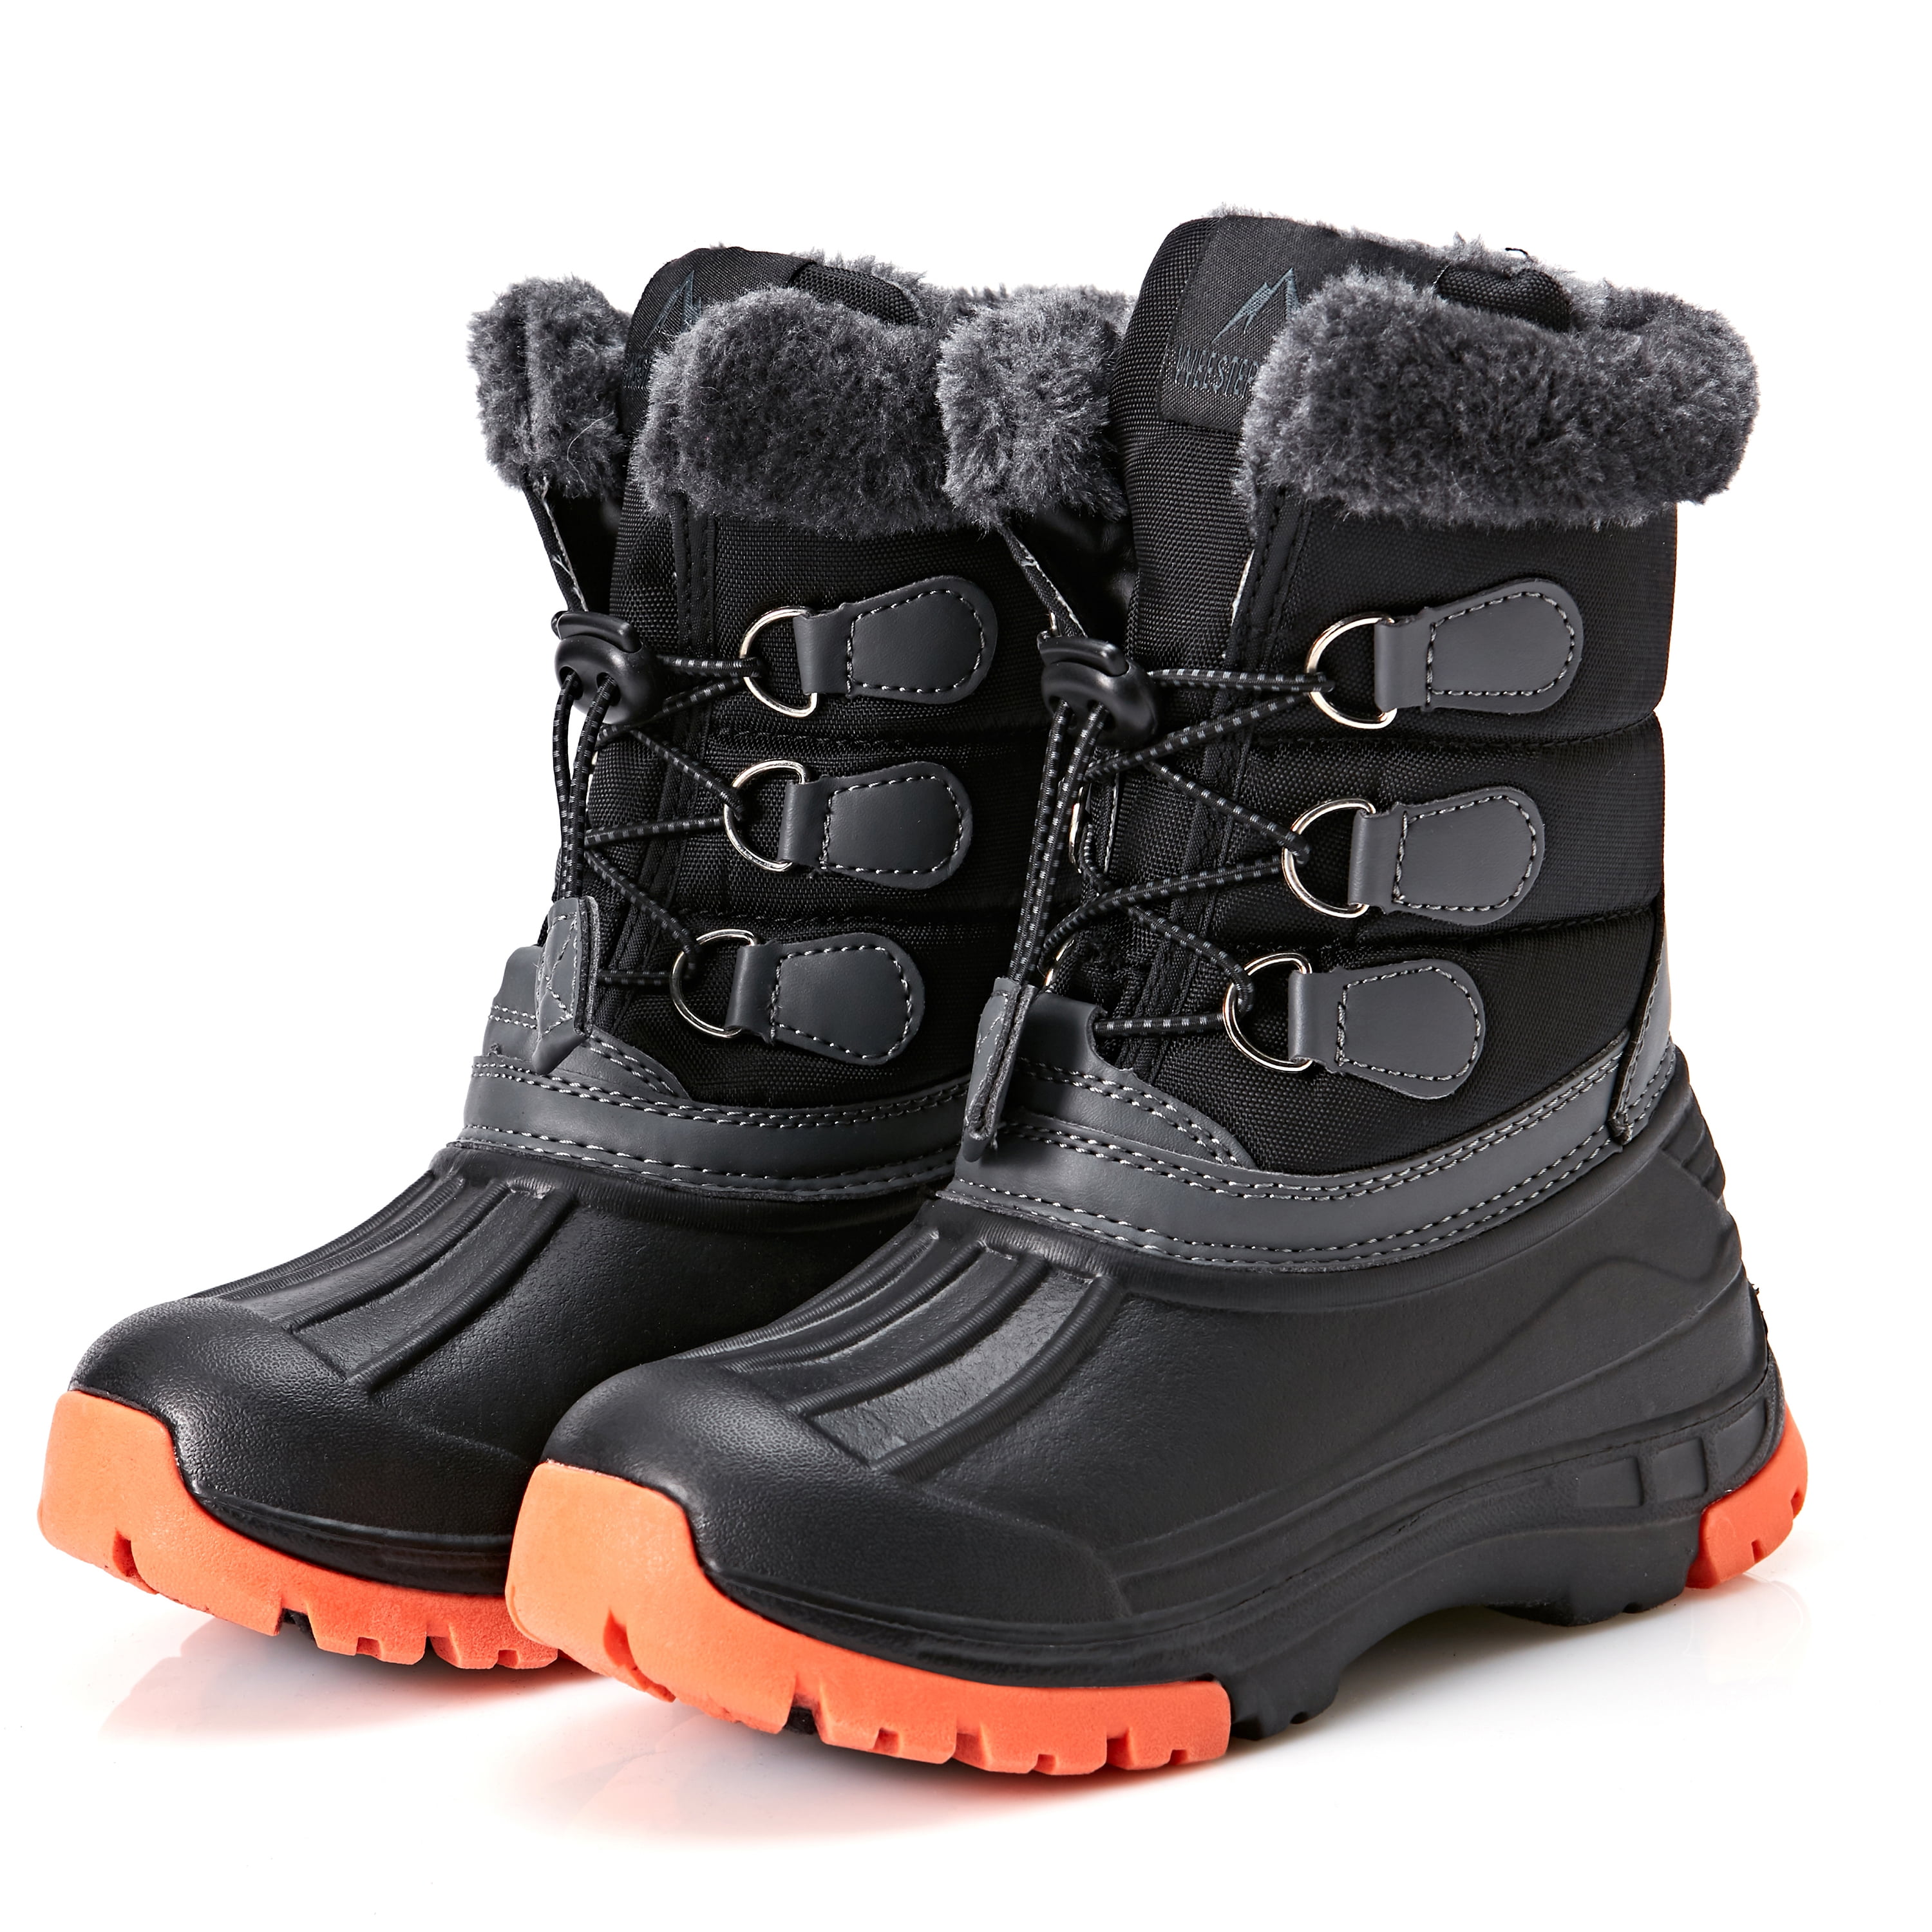 QTMS Kids Waterproof Frosty Snow Boots for Boys Girls 